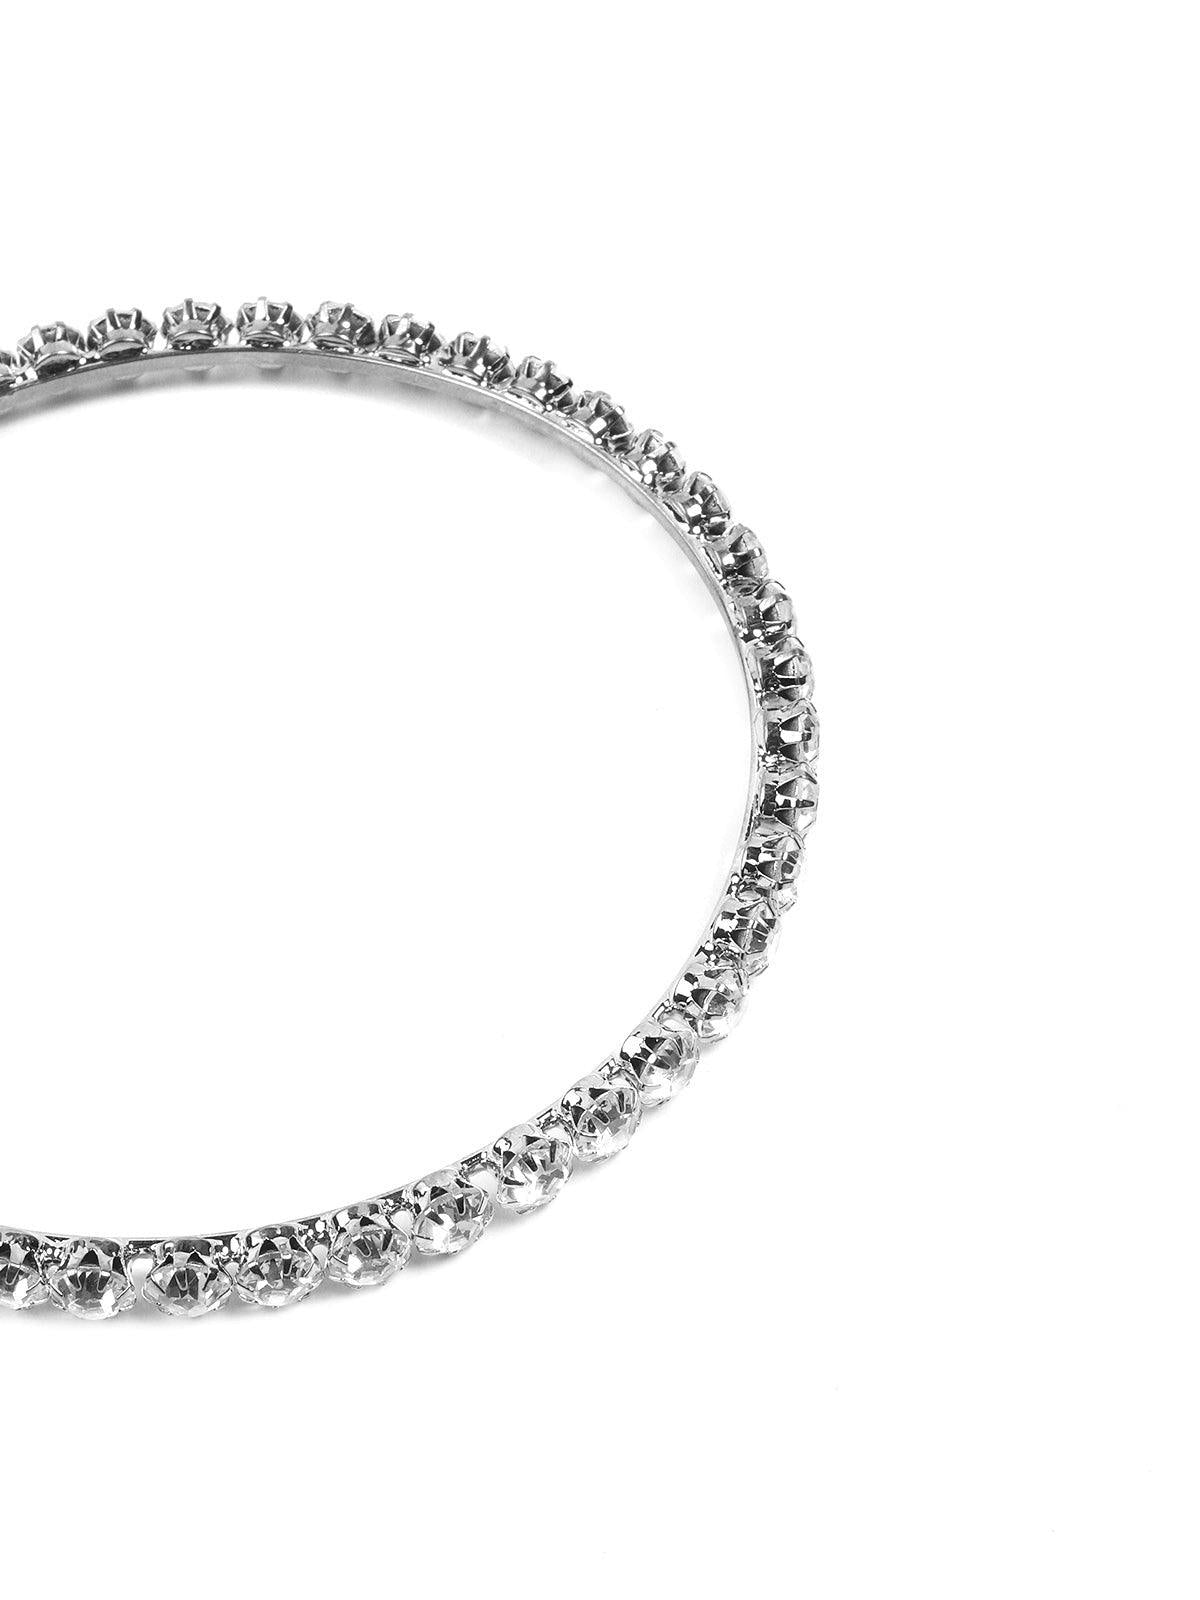 Round Silver Tone Hoops! - Odette